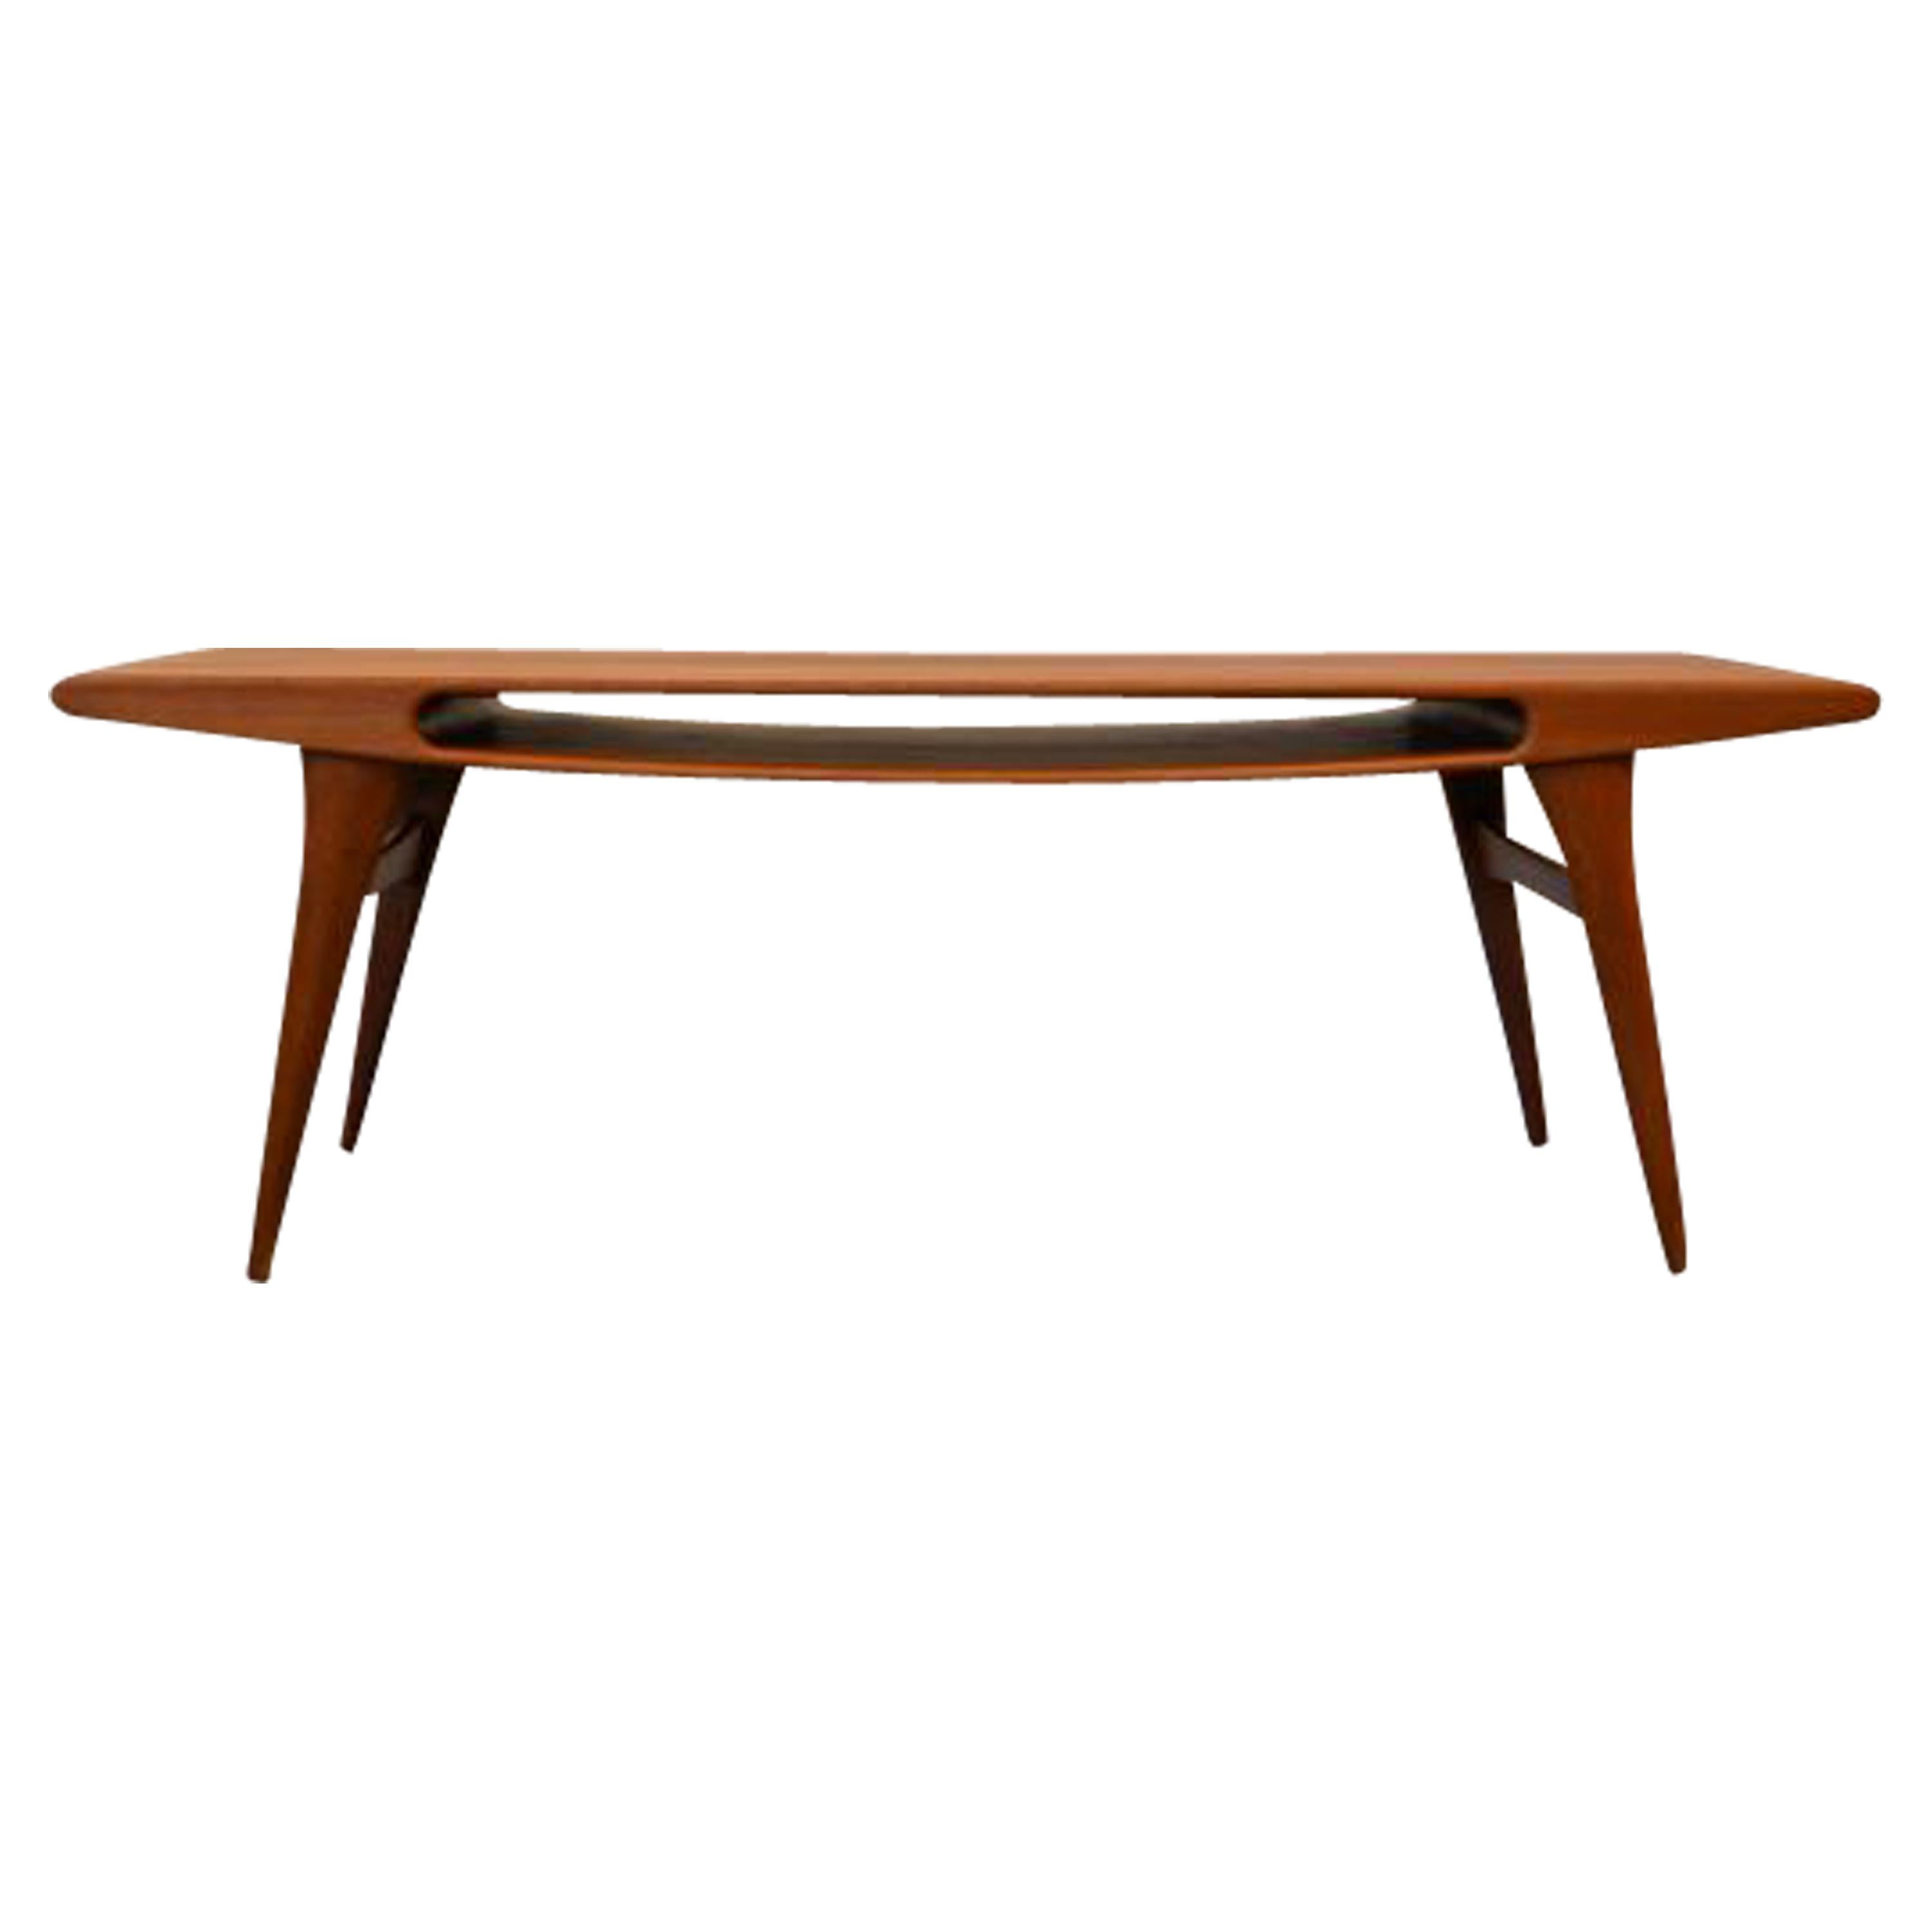 Absolutely stunning vintage Danish design “Smile” coffee table. This unique design adds an instant “wow” and smile to your modern or vintage interior. The smile shaped opening is not just fancy design, it’s also storage space for magazines and